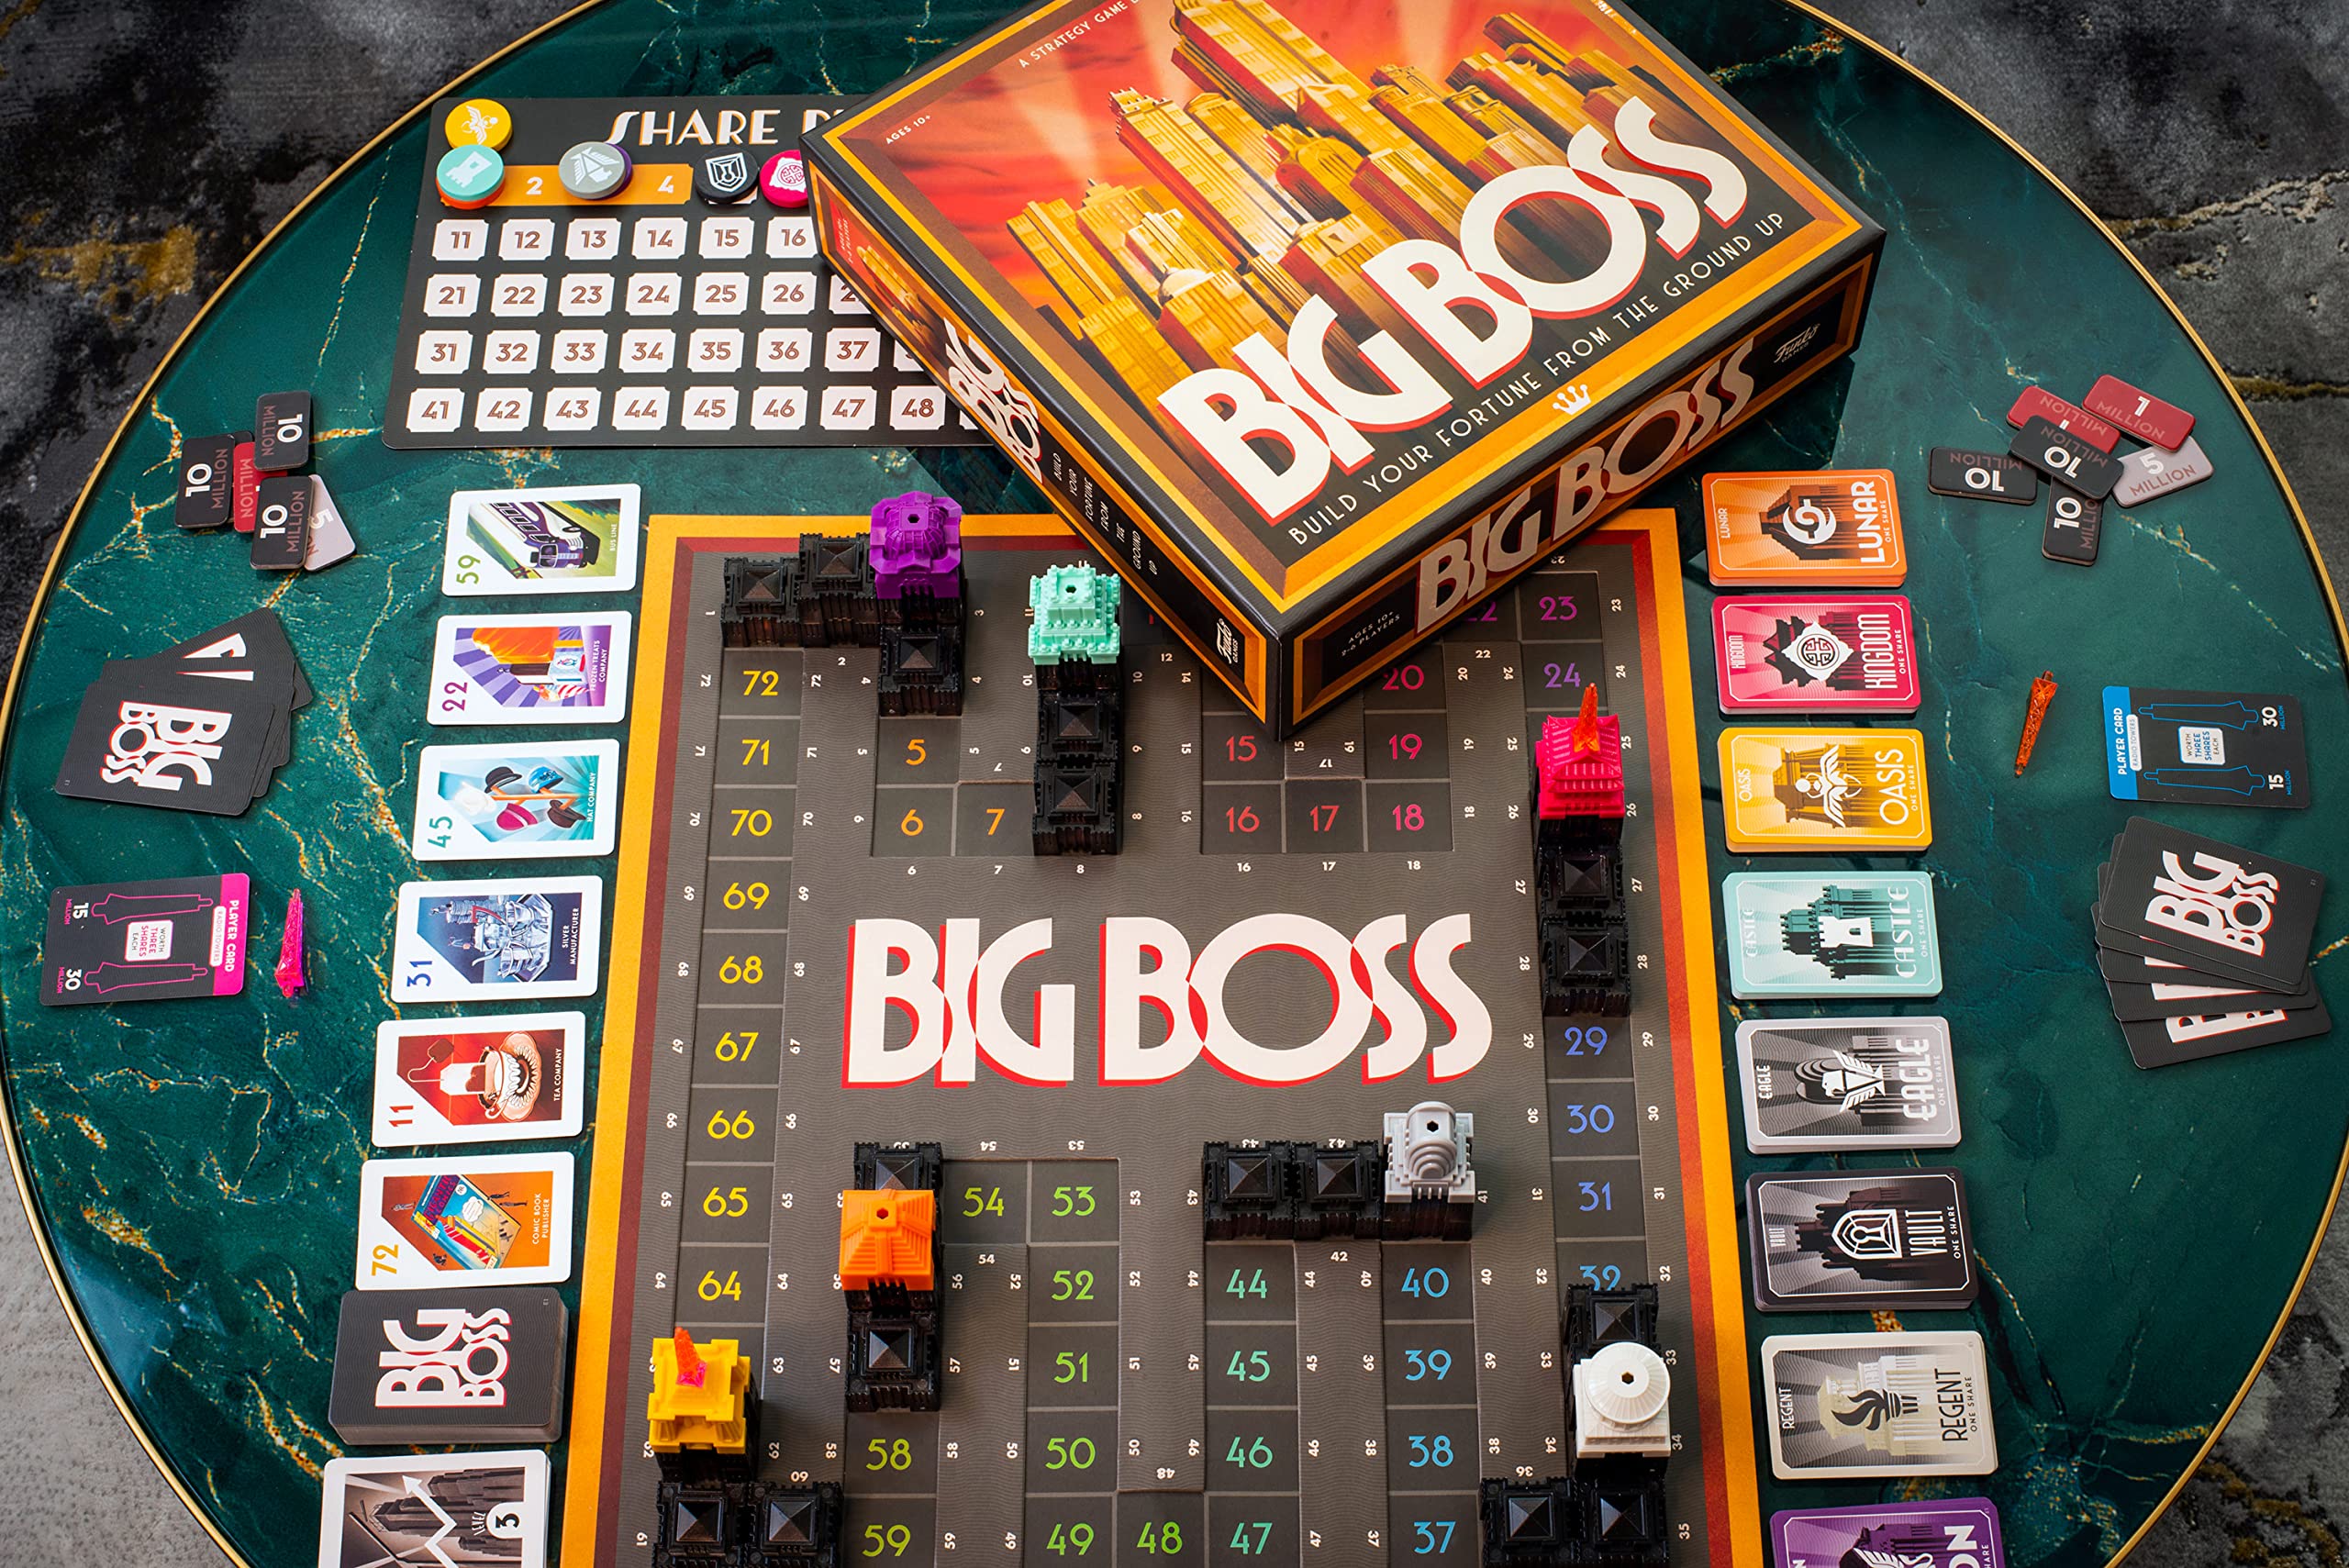 Funko Big Boss Strategy Board Game for 2-6 Players Ages 10+